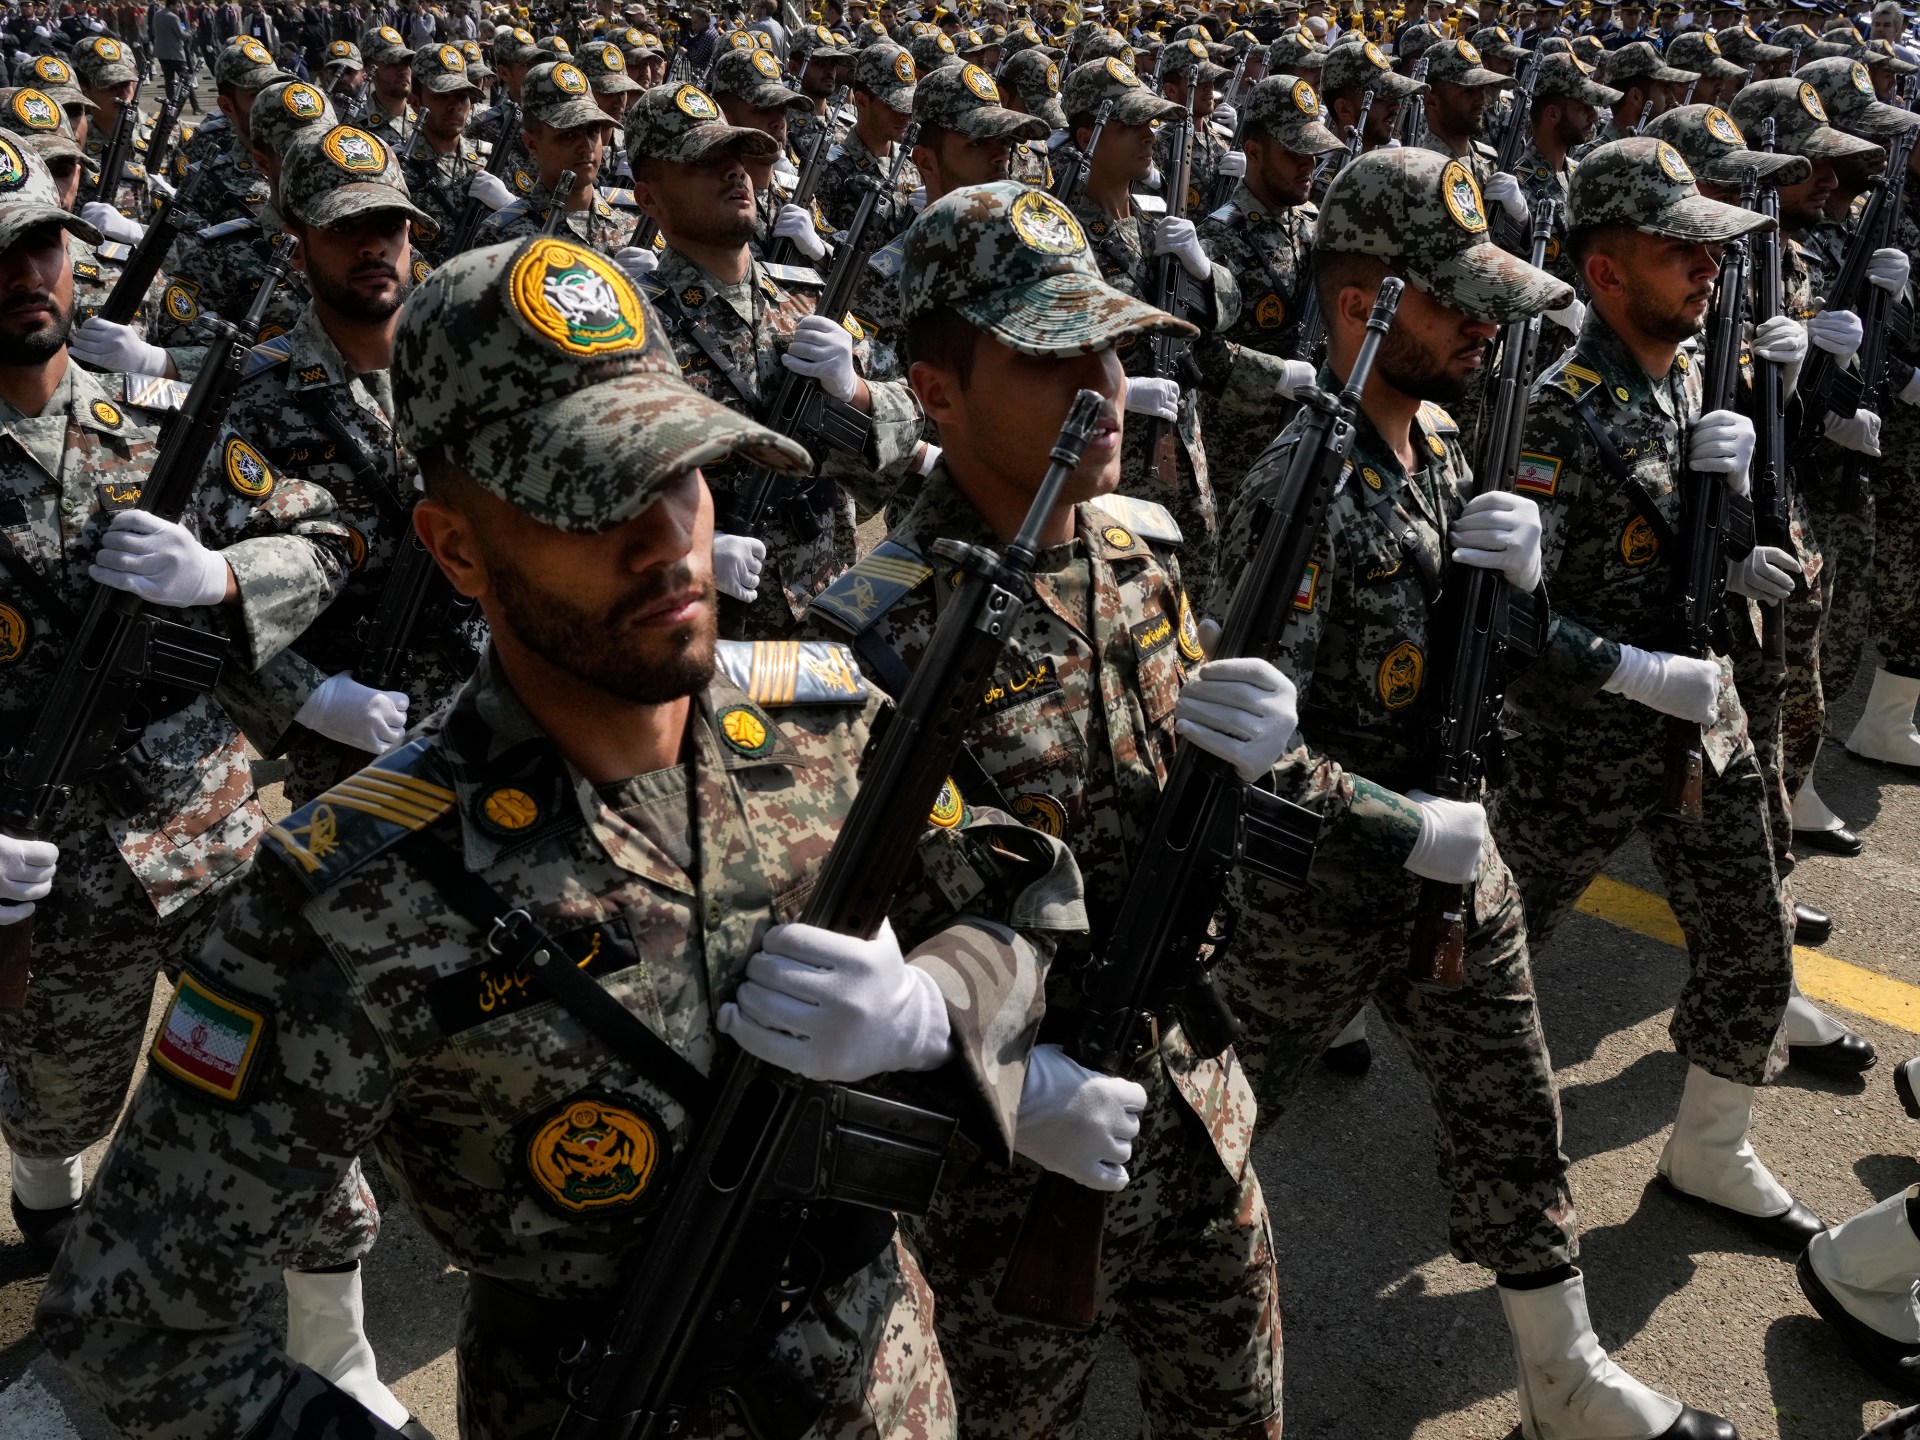 Photos: Iran shows military might as tensions with Israel soar